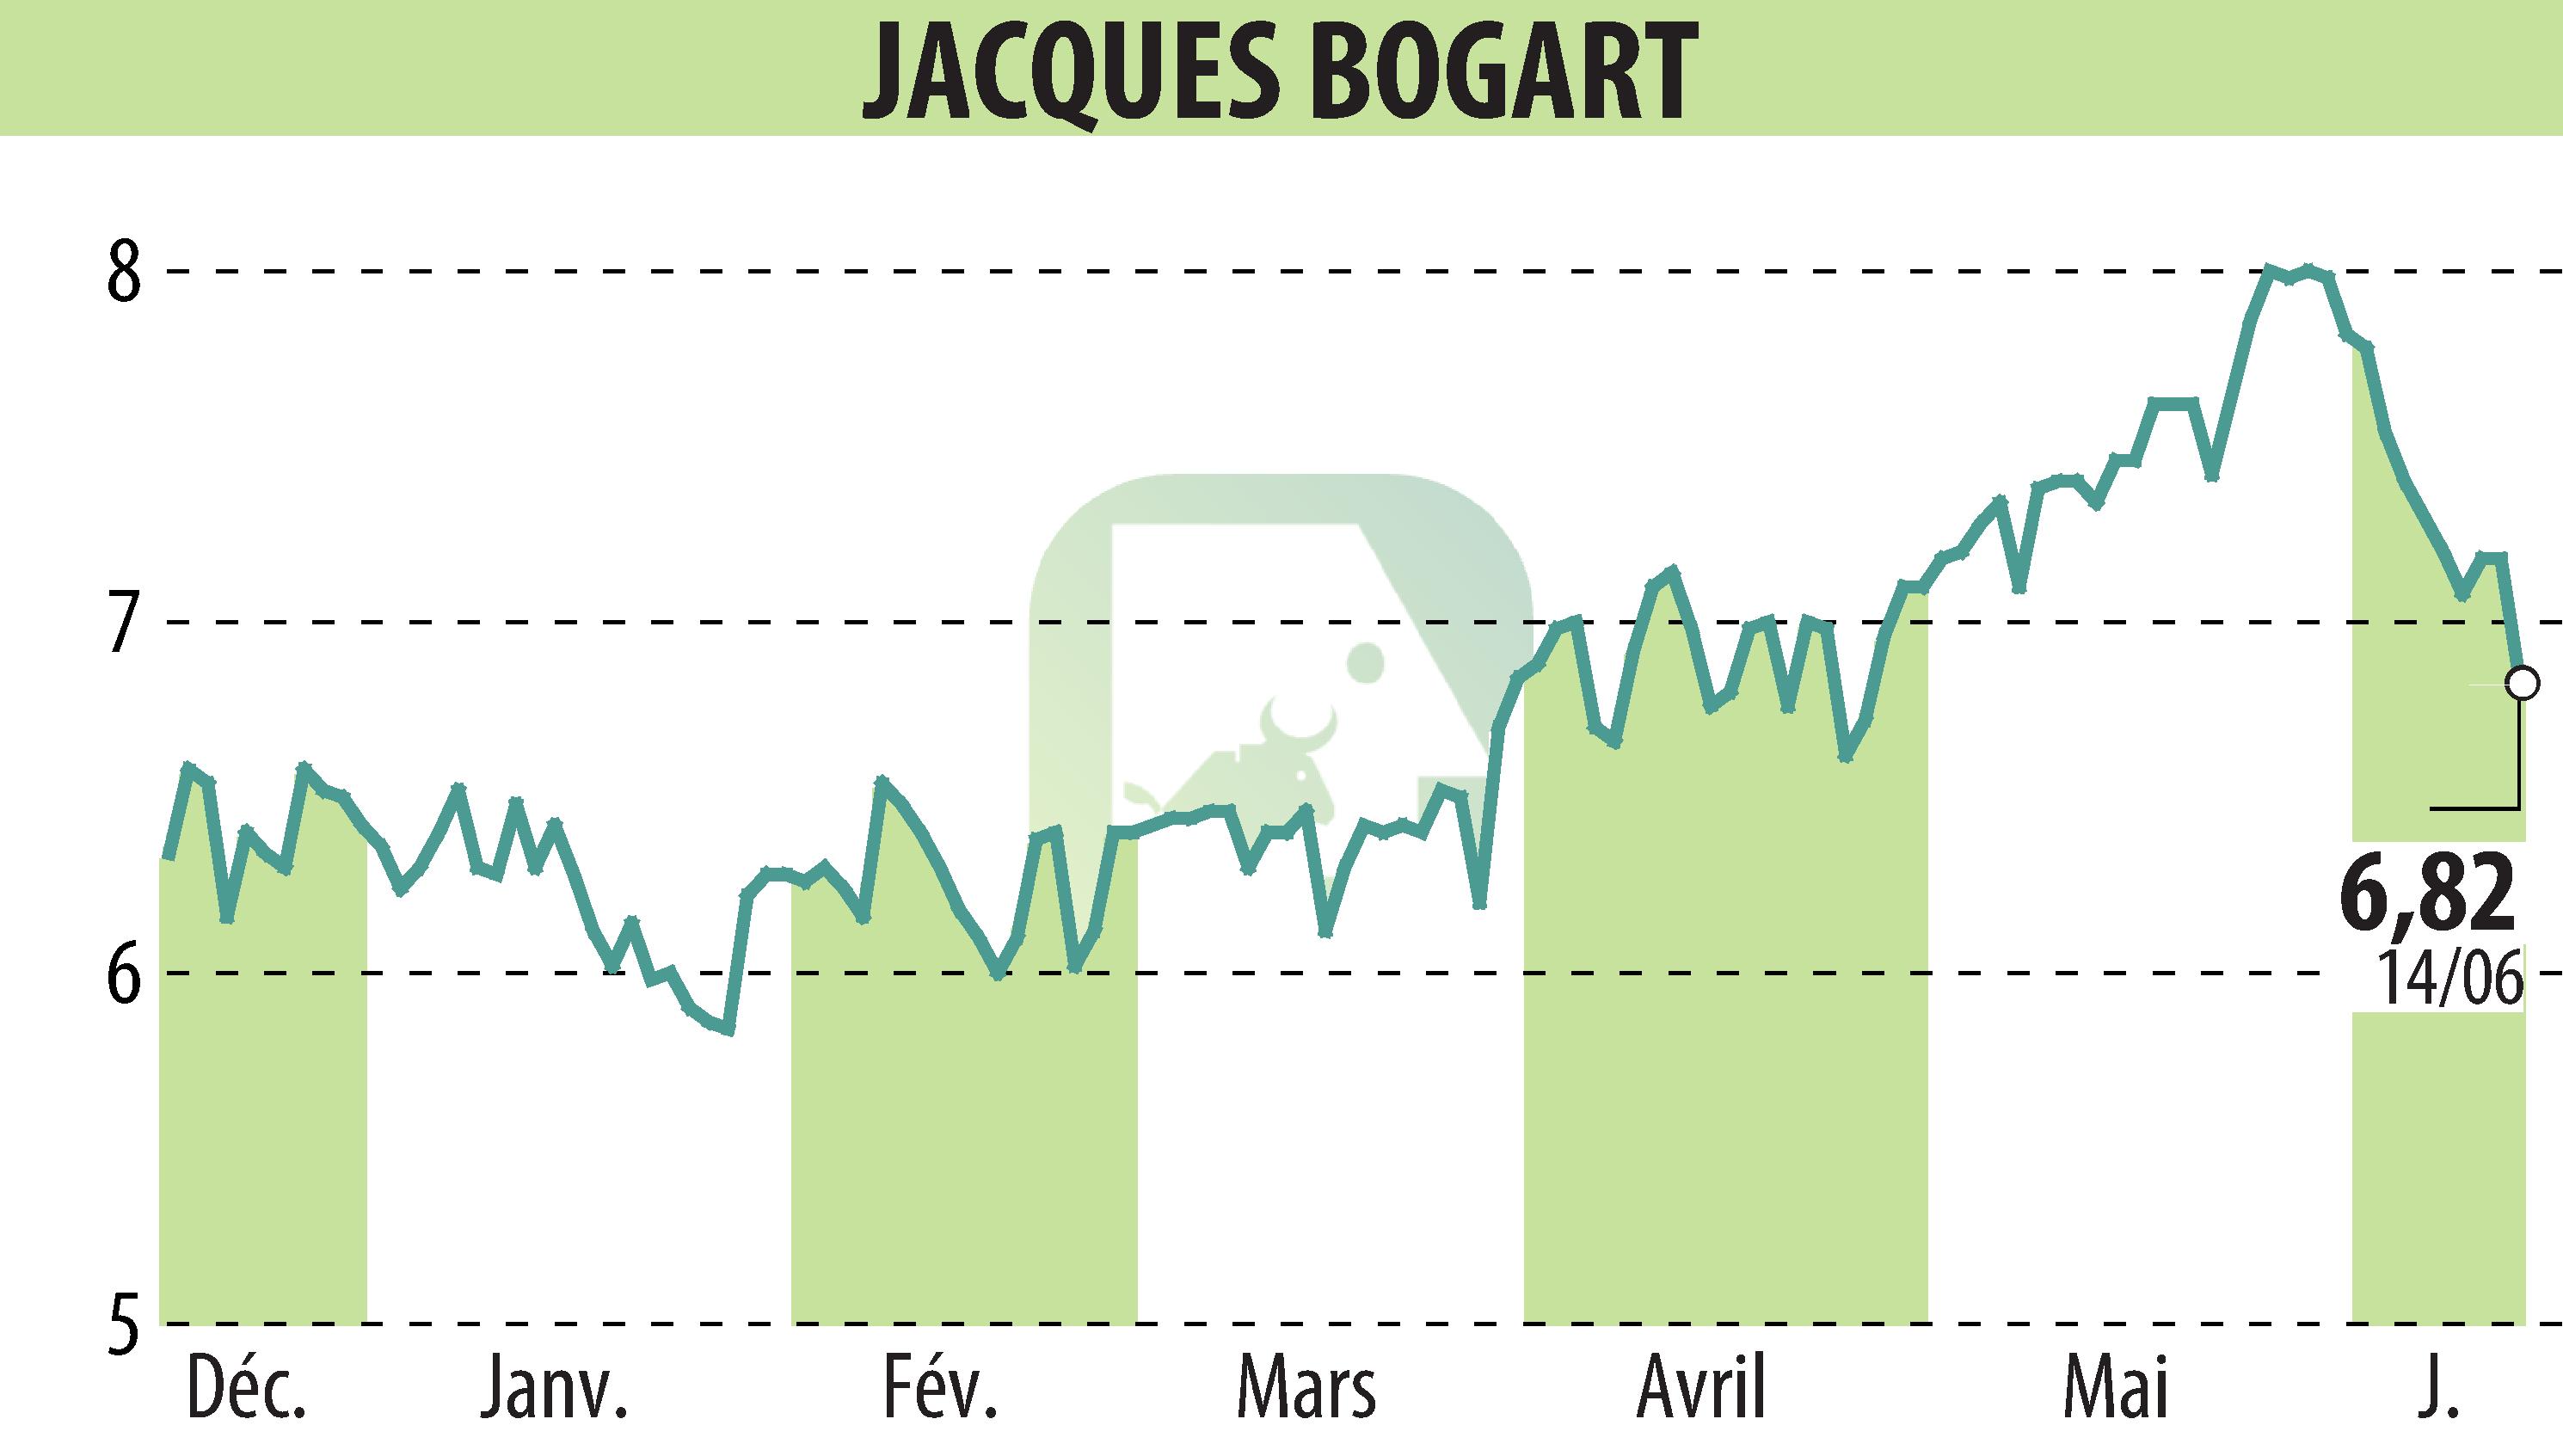 Stock price chart of JACQUES BOGART (EPA:JBOG) showing fluctuations.